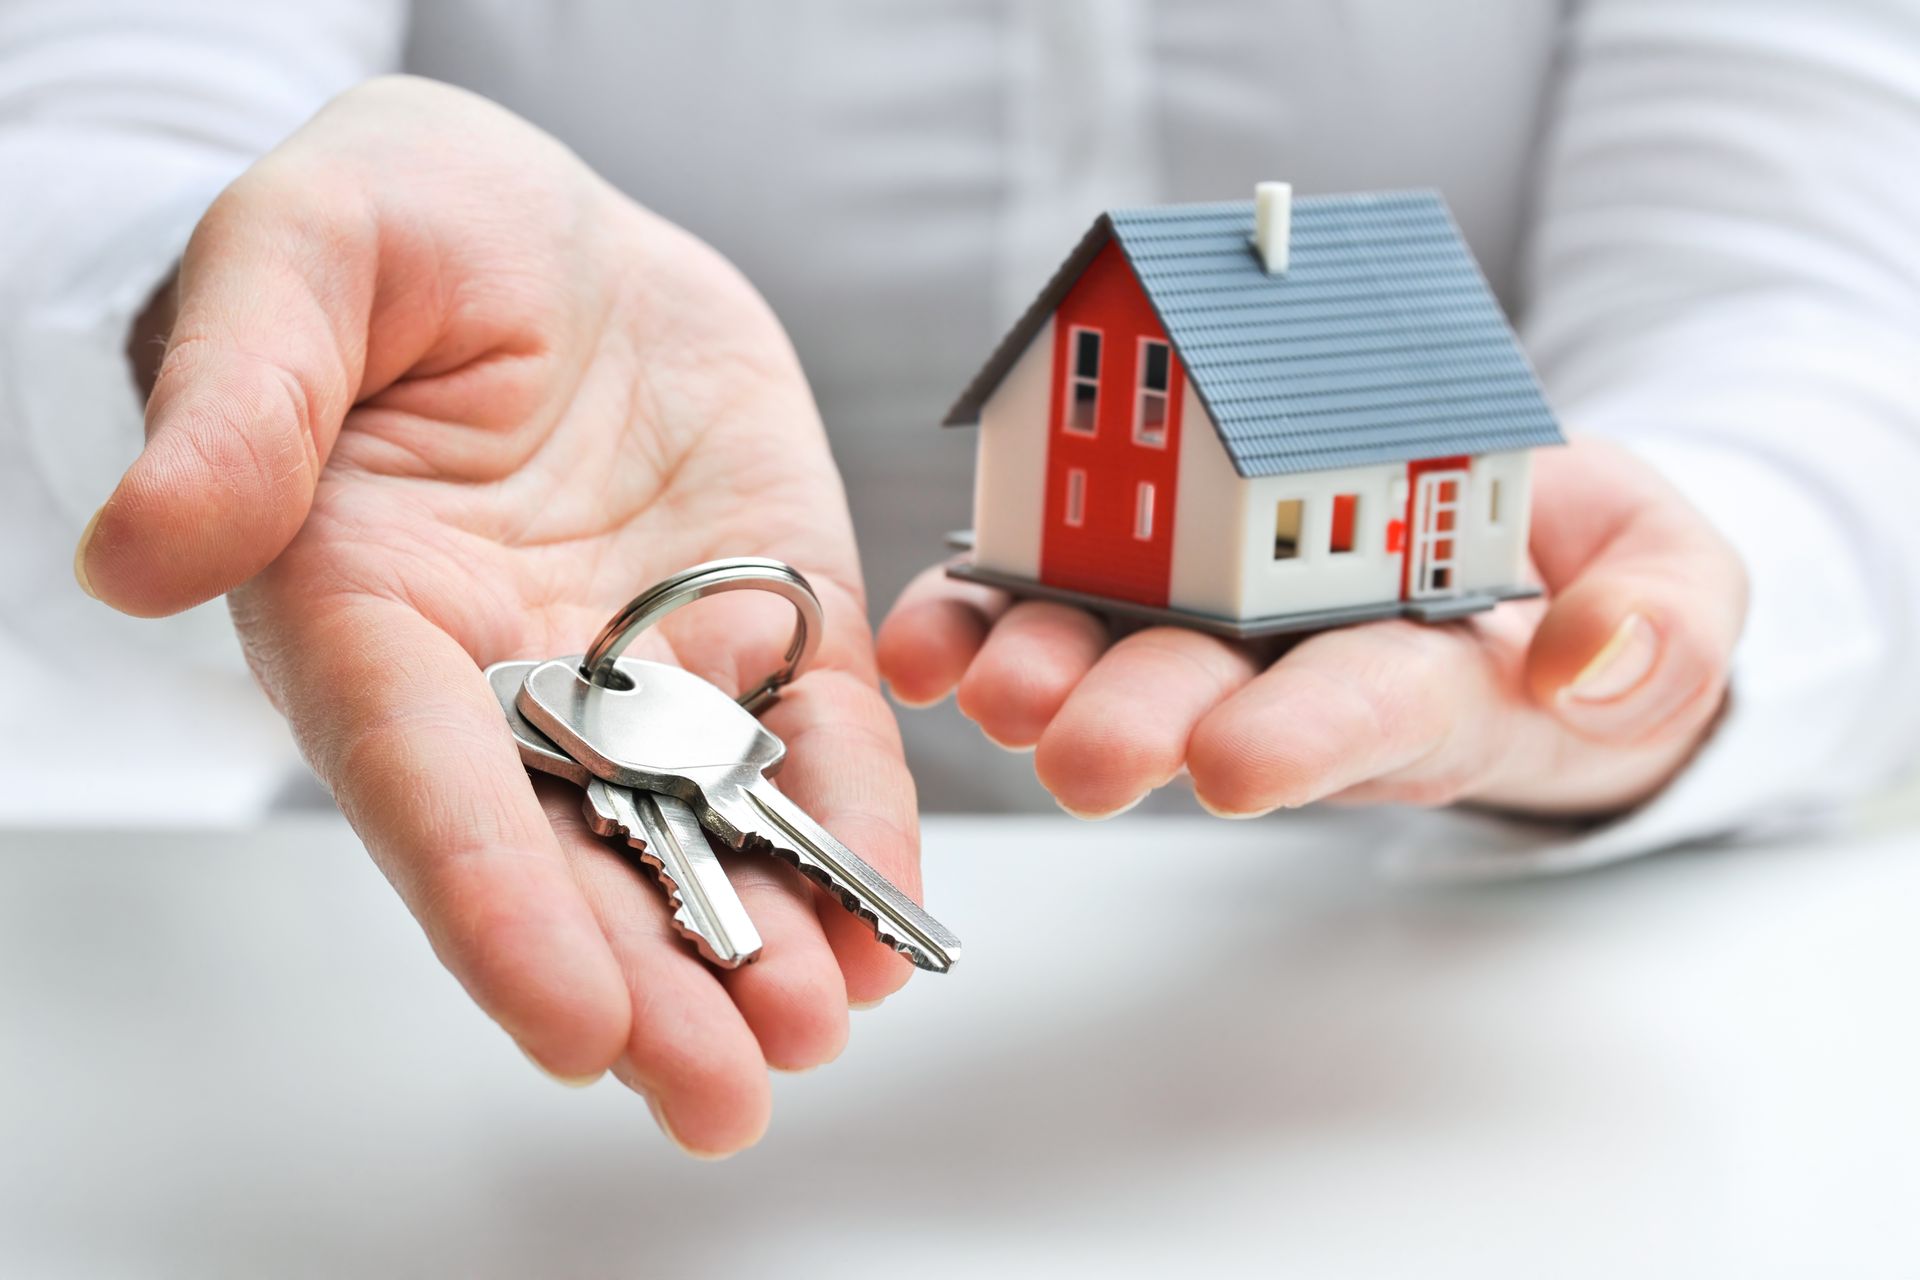 A person is holding a model house and keys in their hands.